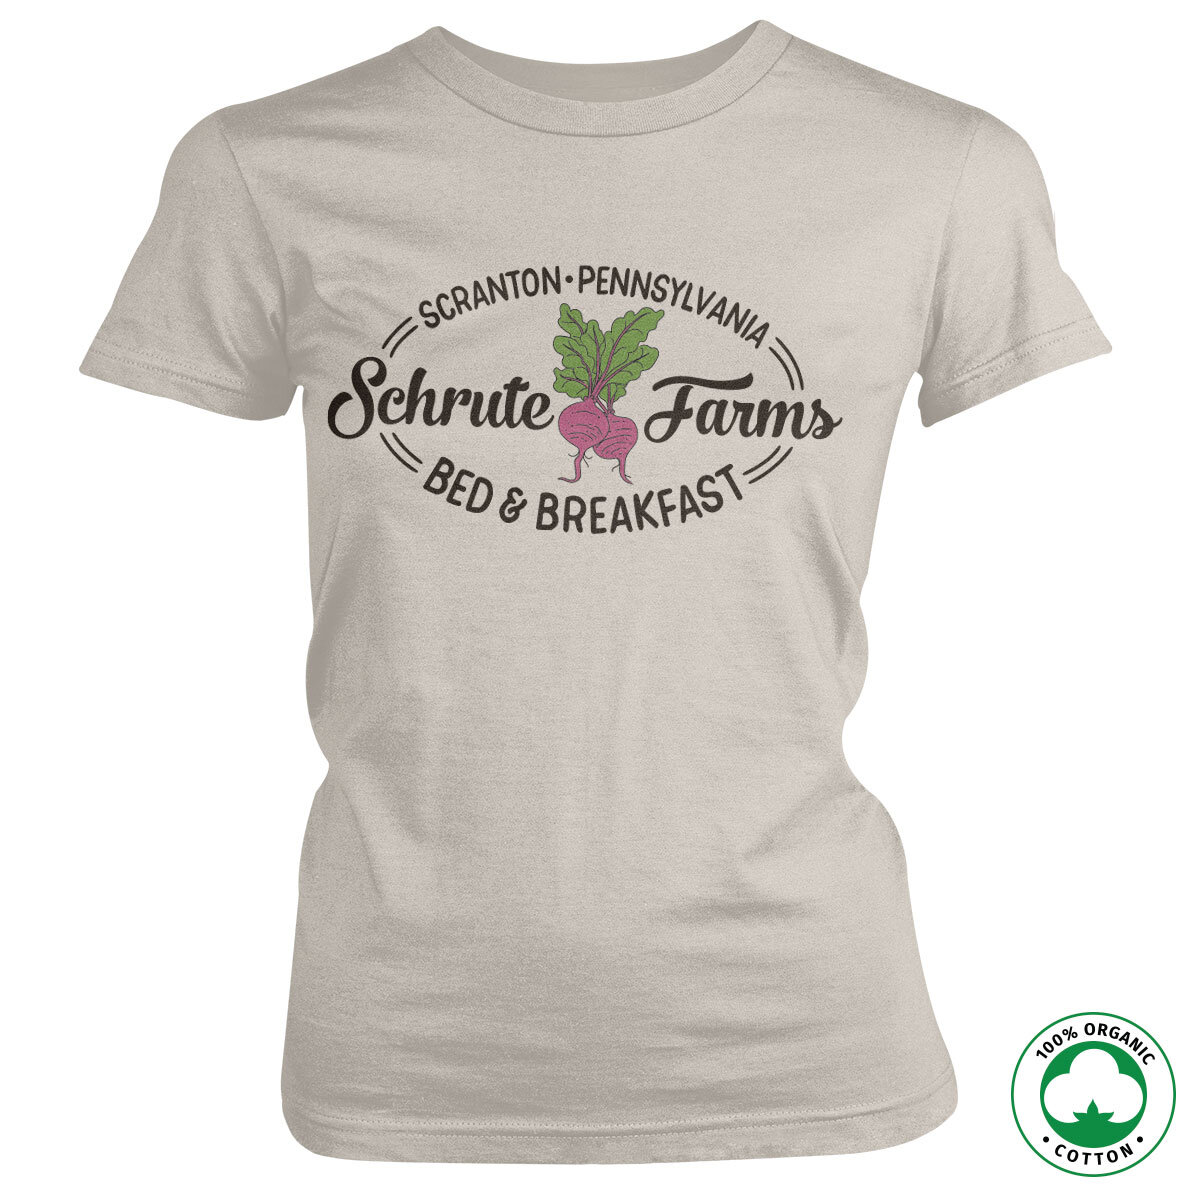 Schrute Farms - Bed & Breakfast Organic Girly Tee